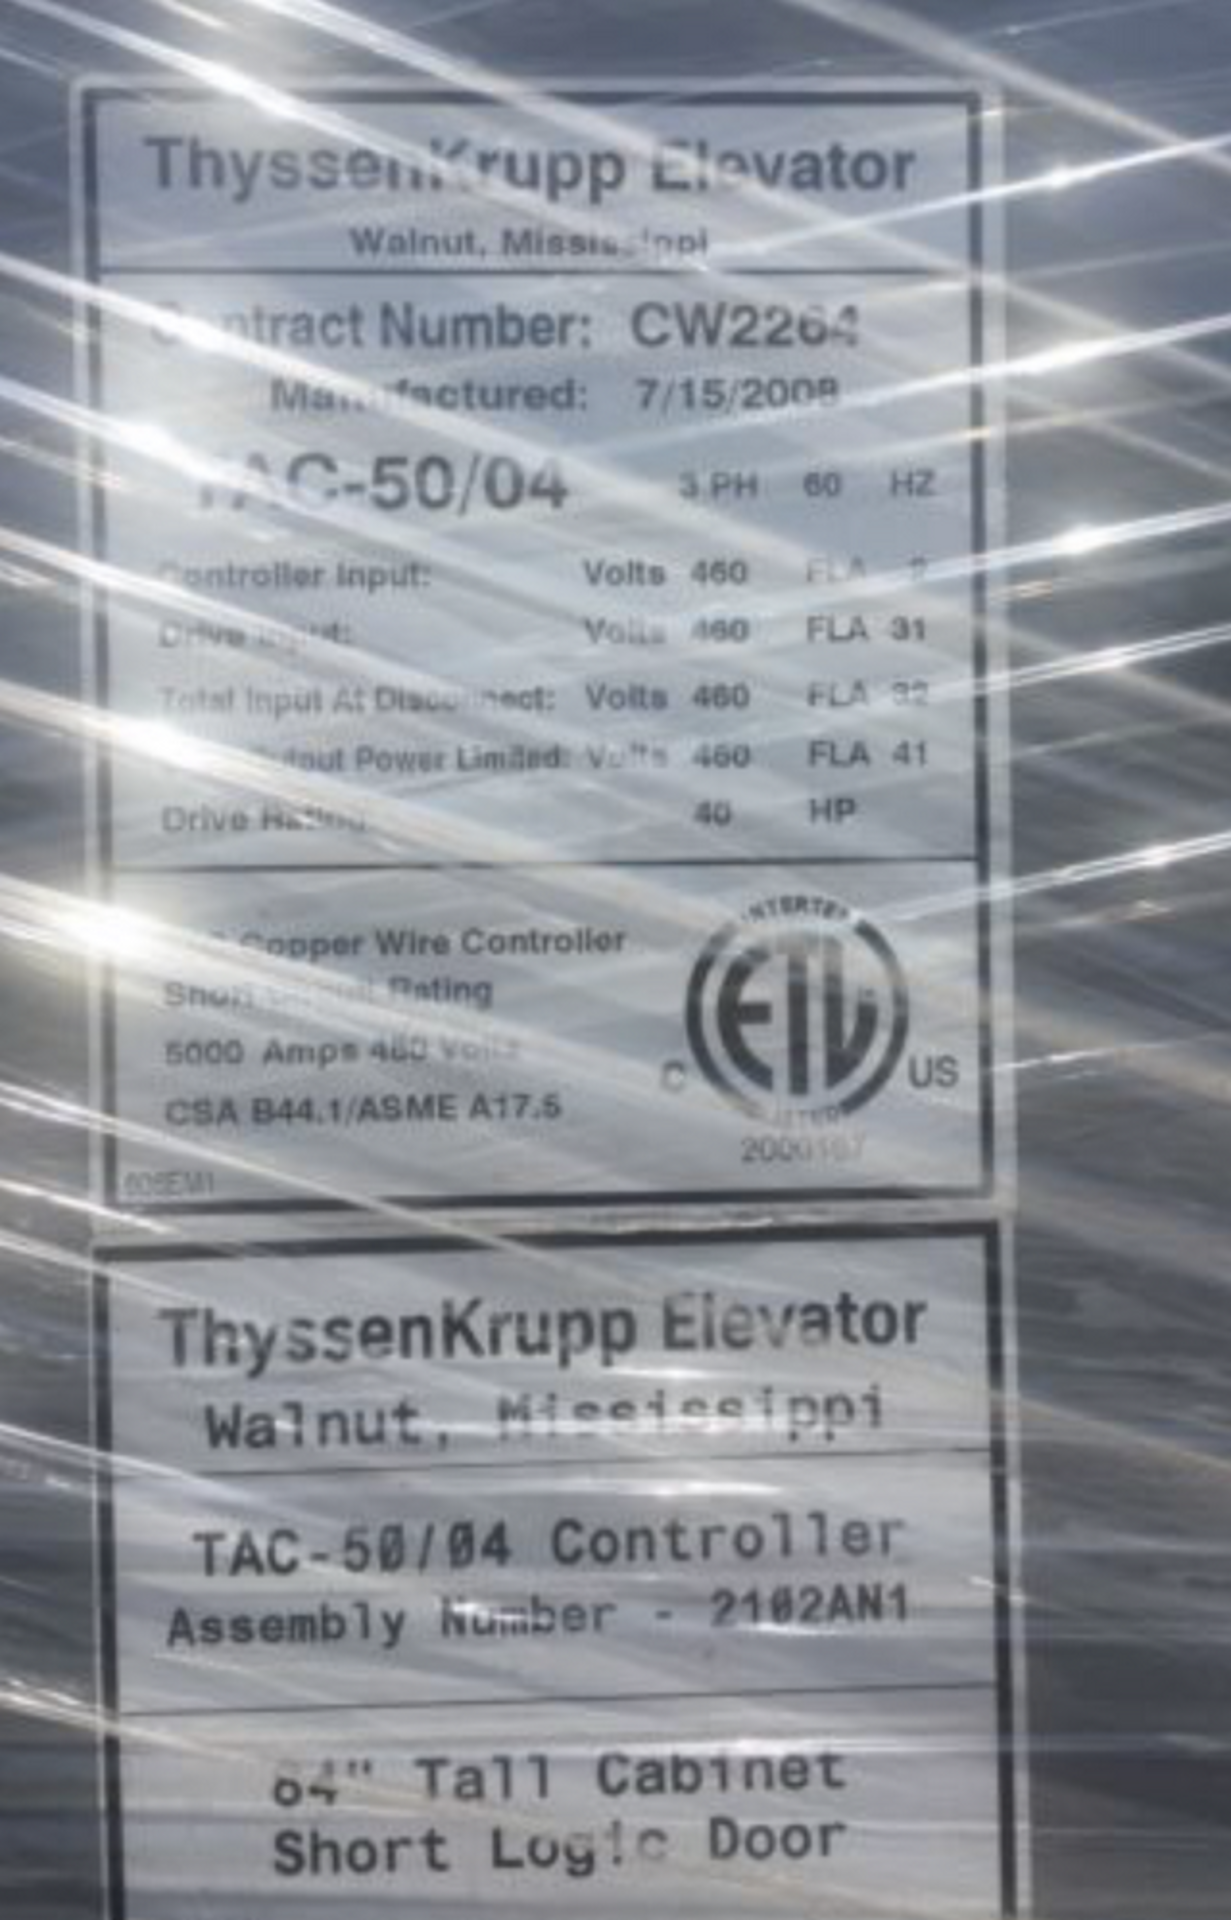 ThyssenKrupp Elevator TAC 50-04 Brand New Controller/Selector Module $55,000 84"   This item is - Image 6 of 6